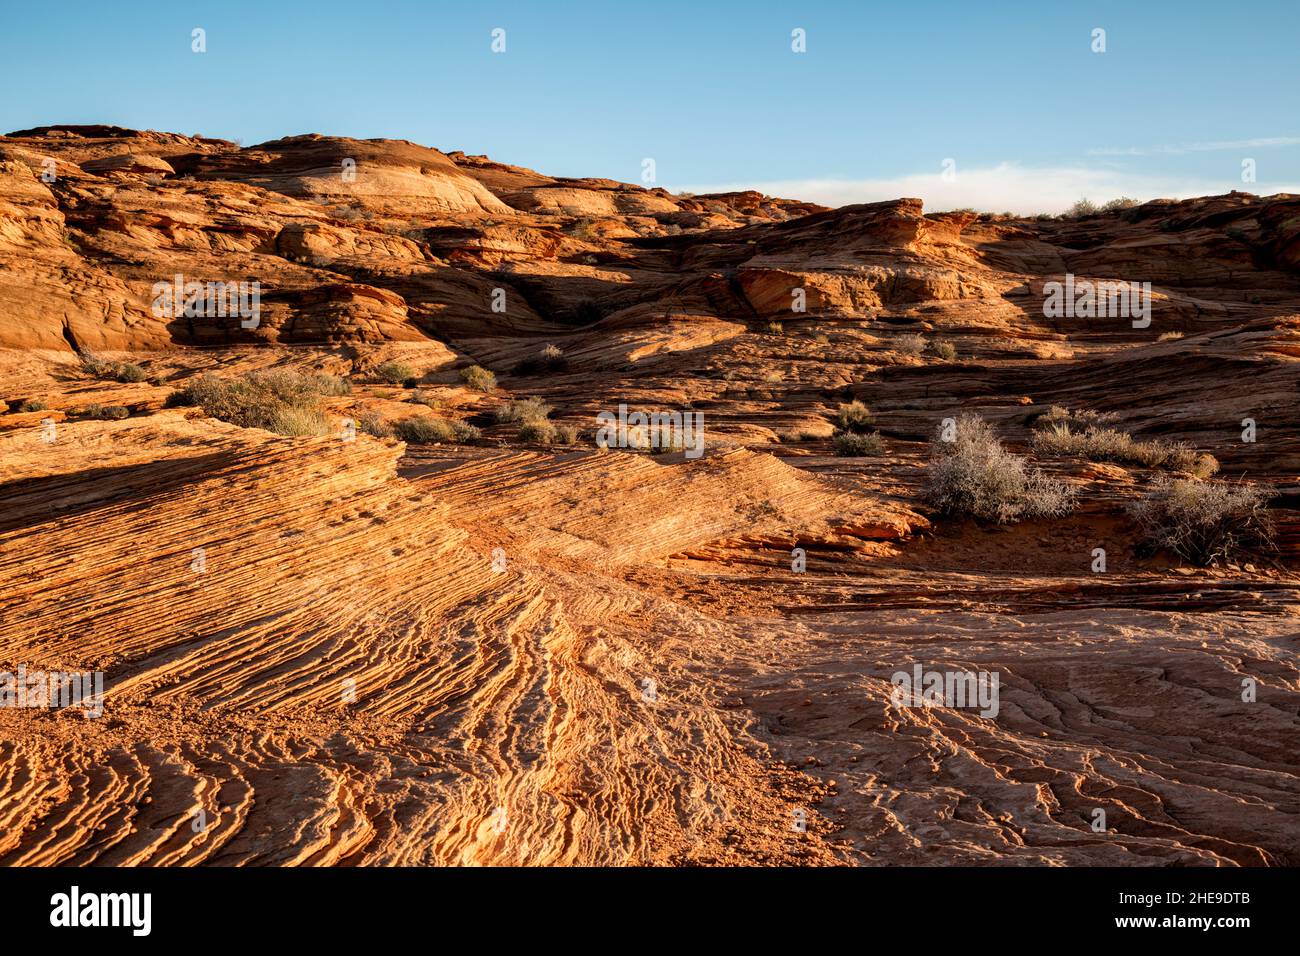 USA, Arizona, Page, Late afternoon light on rock striations at Horseshoe Bend Stock Photo